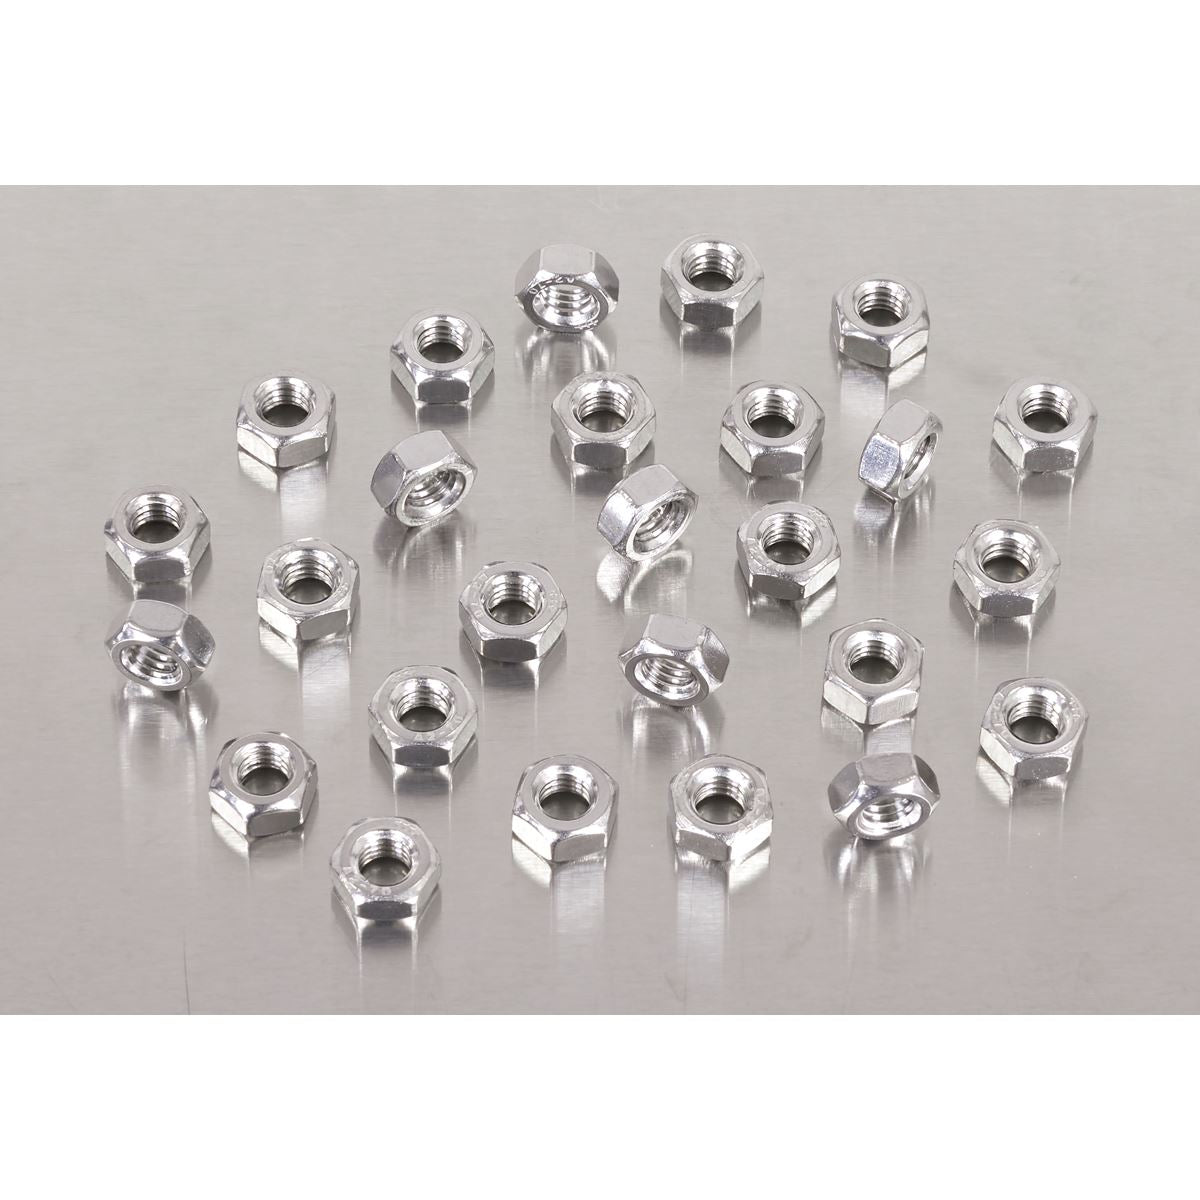 Sealey Stainless Steel Nut Din 934 – M6 - Pack of 100